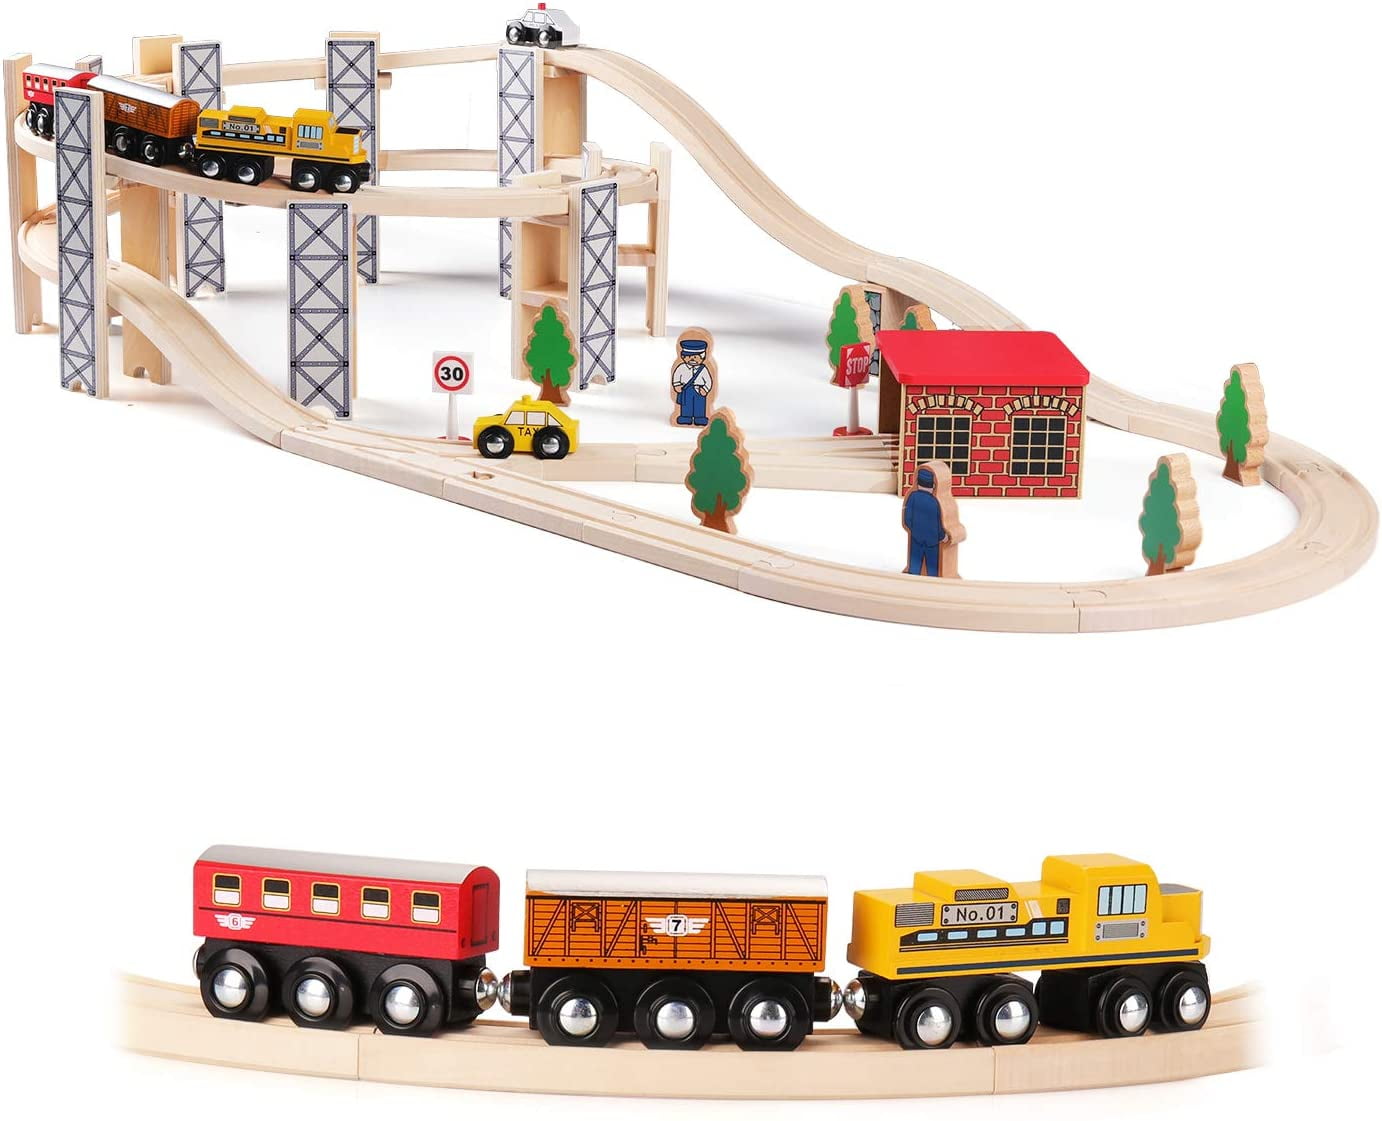 Spiral Track Kid Toy Play Activity Wooden City Trains Building Accessories 